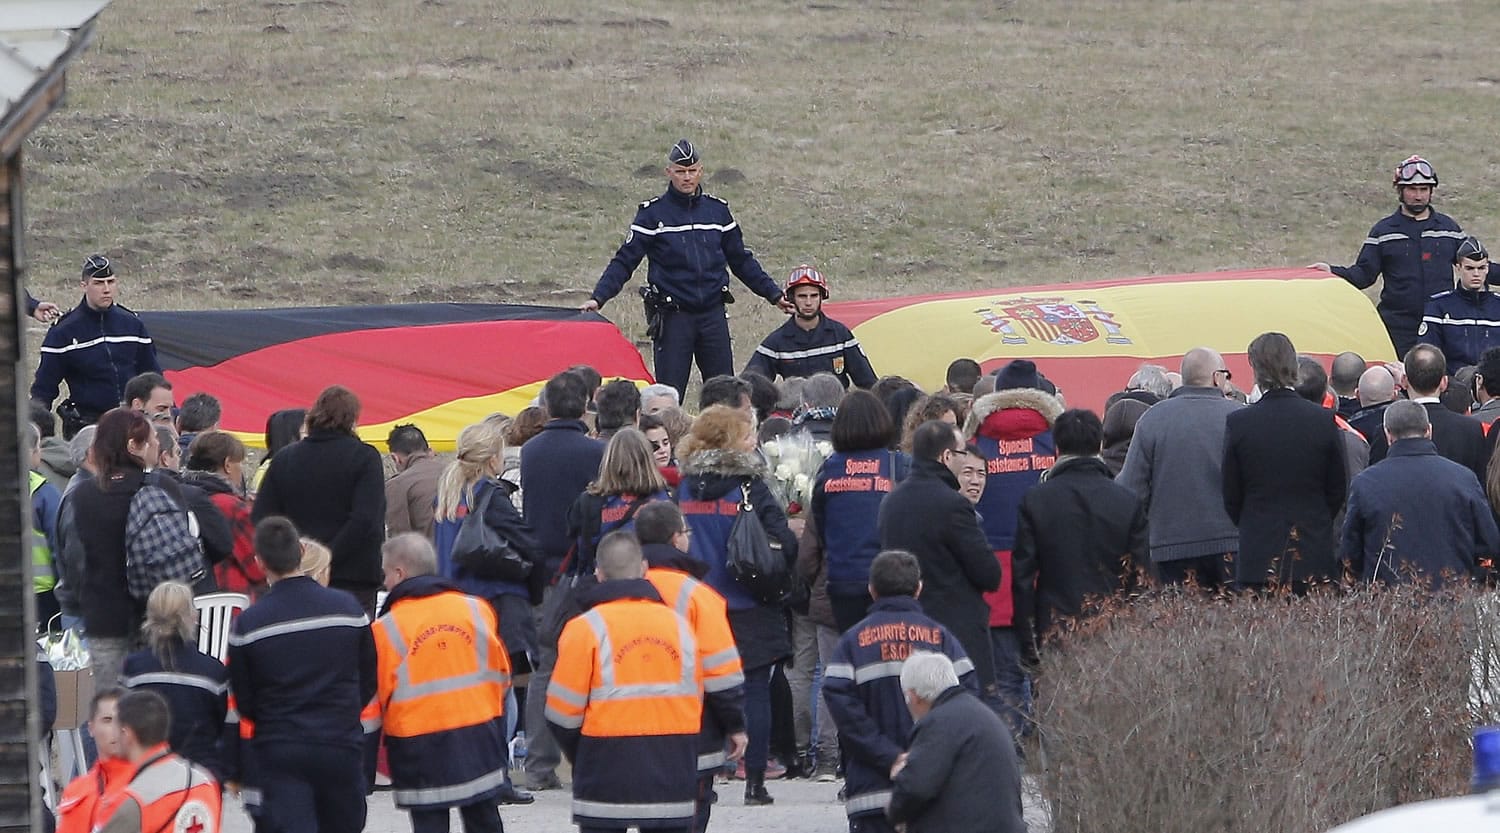 French gendarmes hold German and Spanish flags as family members of people involved in the Germanwings jetliner that crashed Tuesday in the French Alps attend a gathering in Le Vernet, Thursday, March 26, 2015. French prosecutors' assertion that this week's air crash of a German airliner into a rugged mountainside was a deliberate act of the co-pilot points to the possible need for a third pilot in airline cockpits, several aviation safety experts said Thursday.